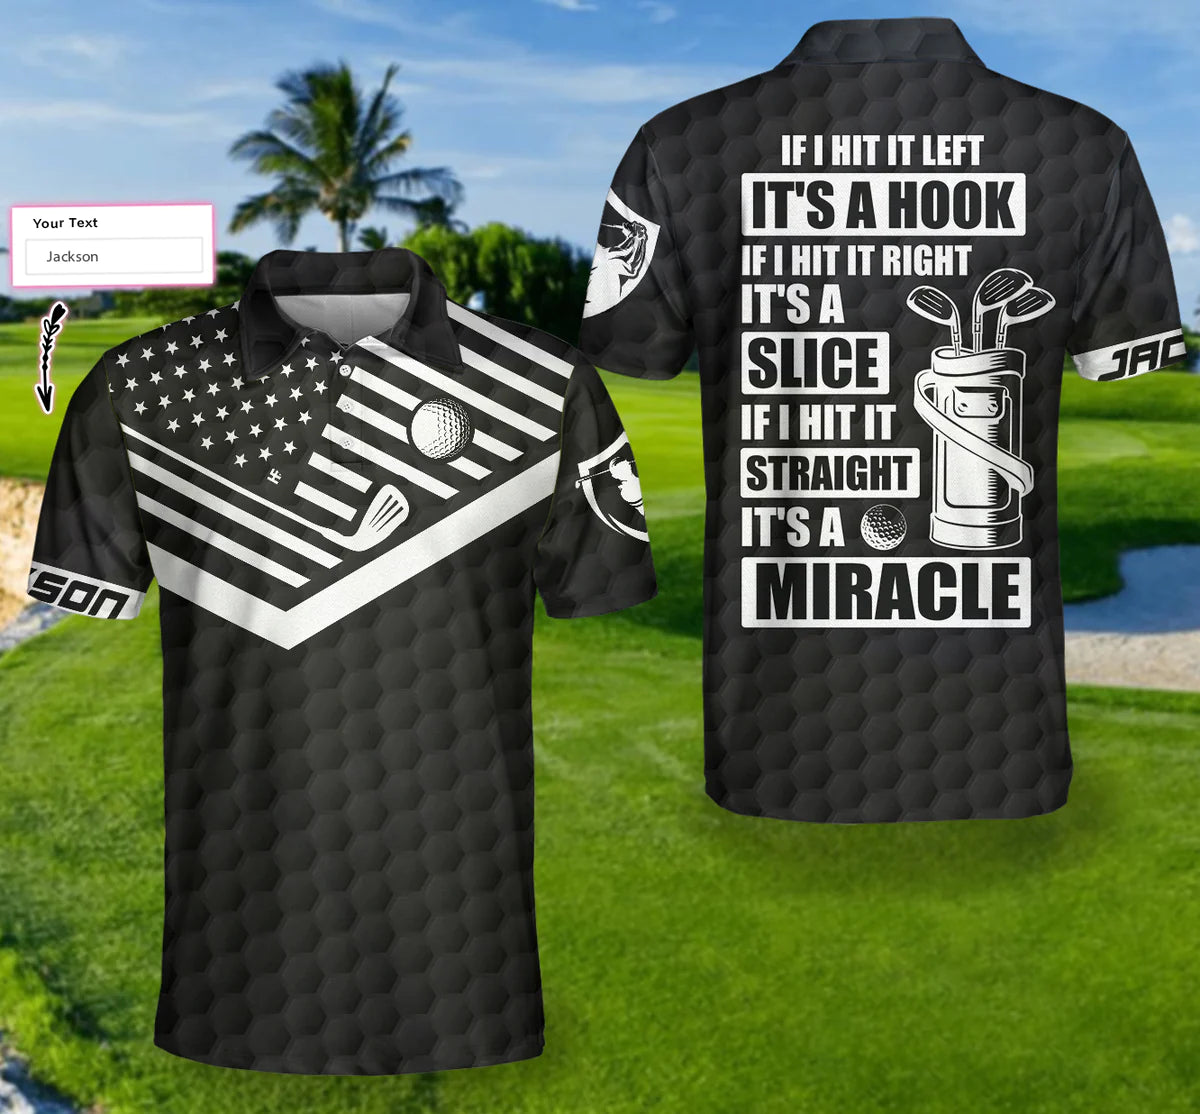 As I Age, It Becomes More Challenging to Locate My Golf Balls – Custom Polo Shirt for Golfers, Personalized Black American Flag Golf Shirt for Men – GP414